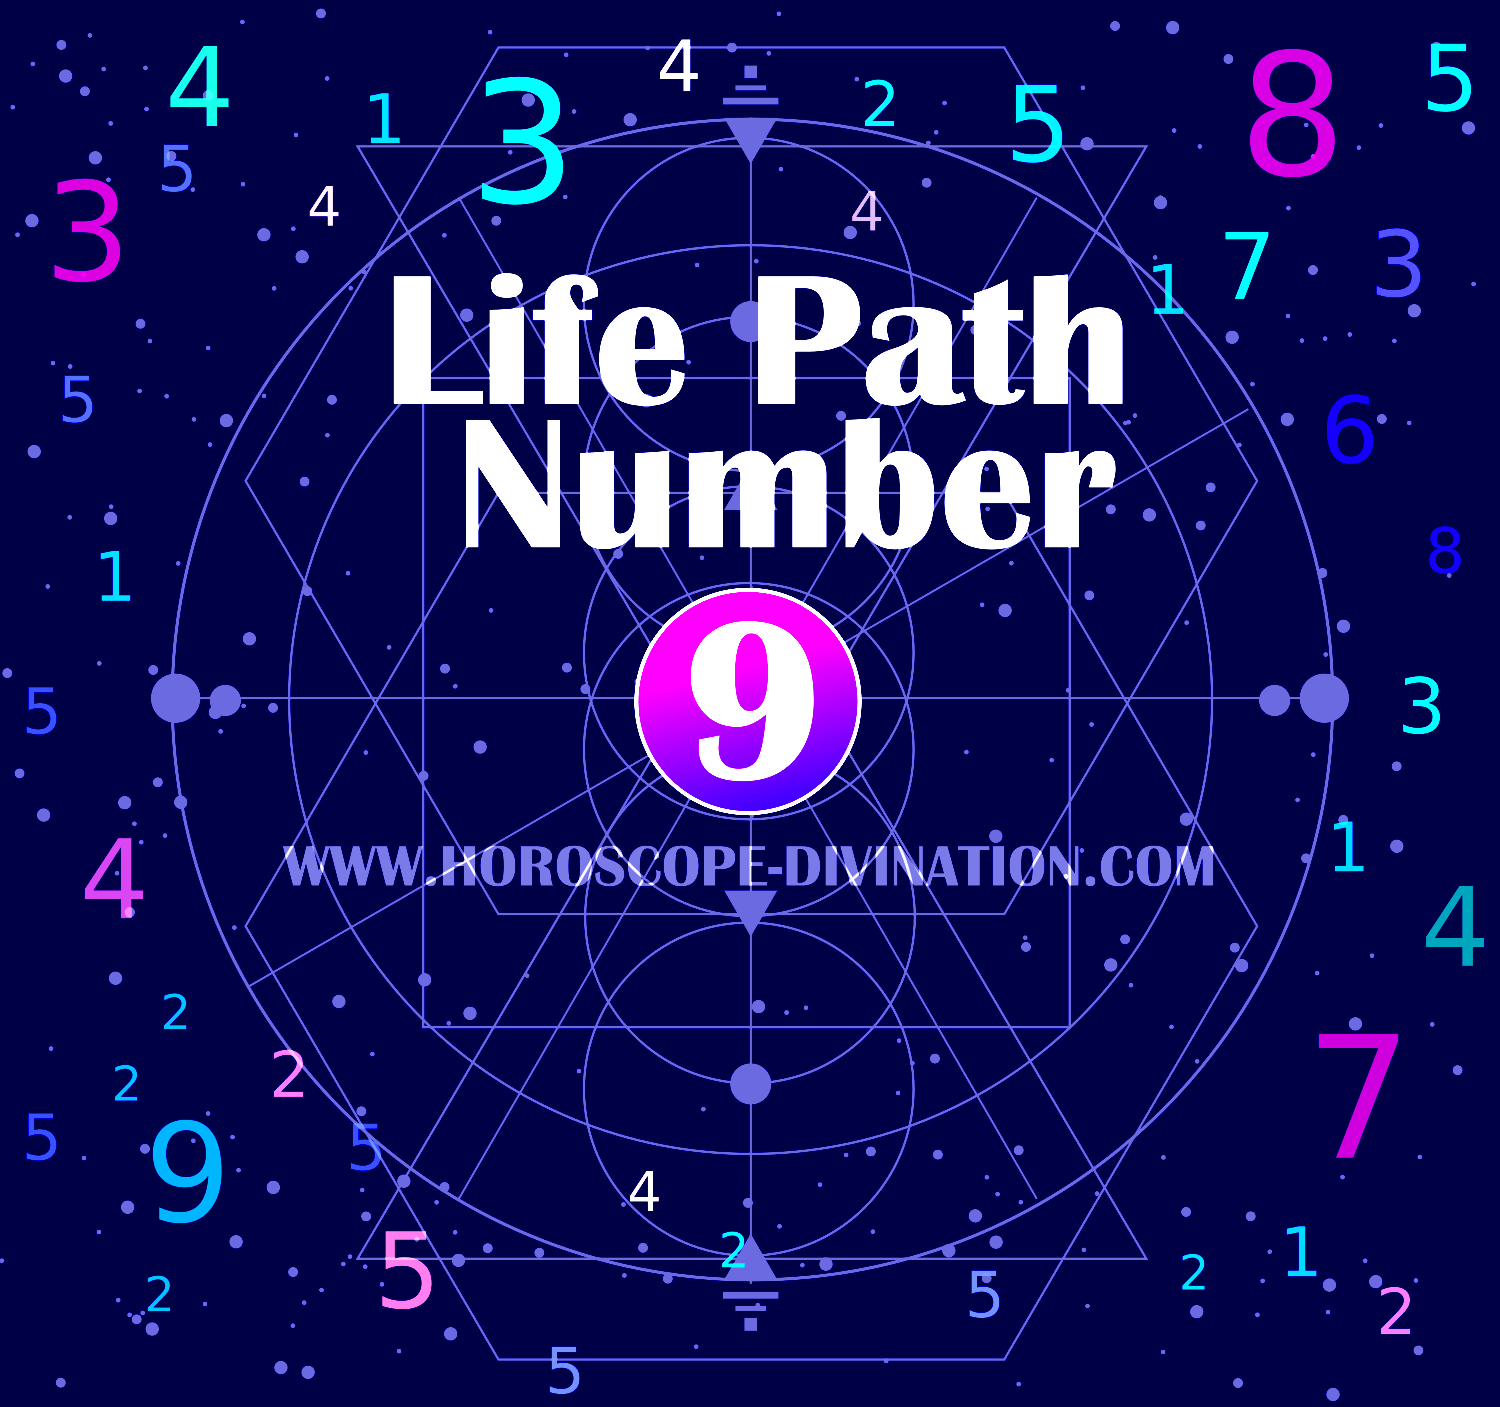 numerology life path number 12